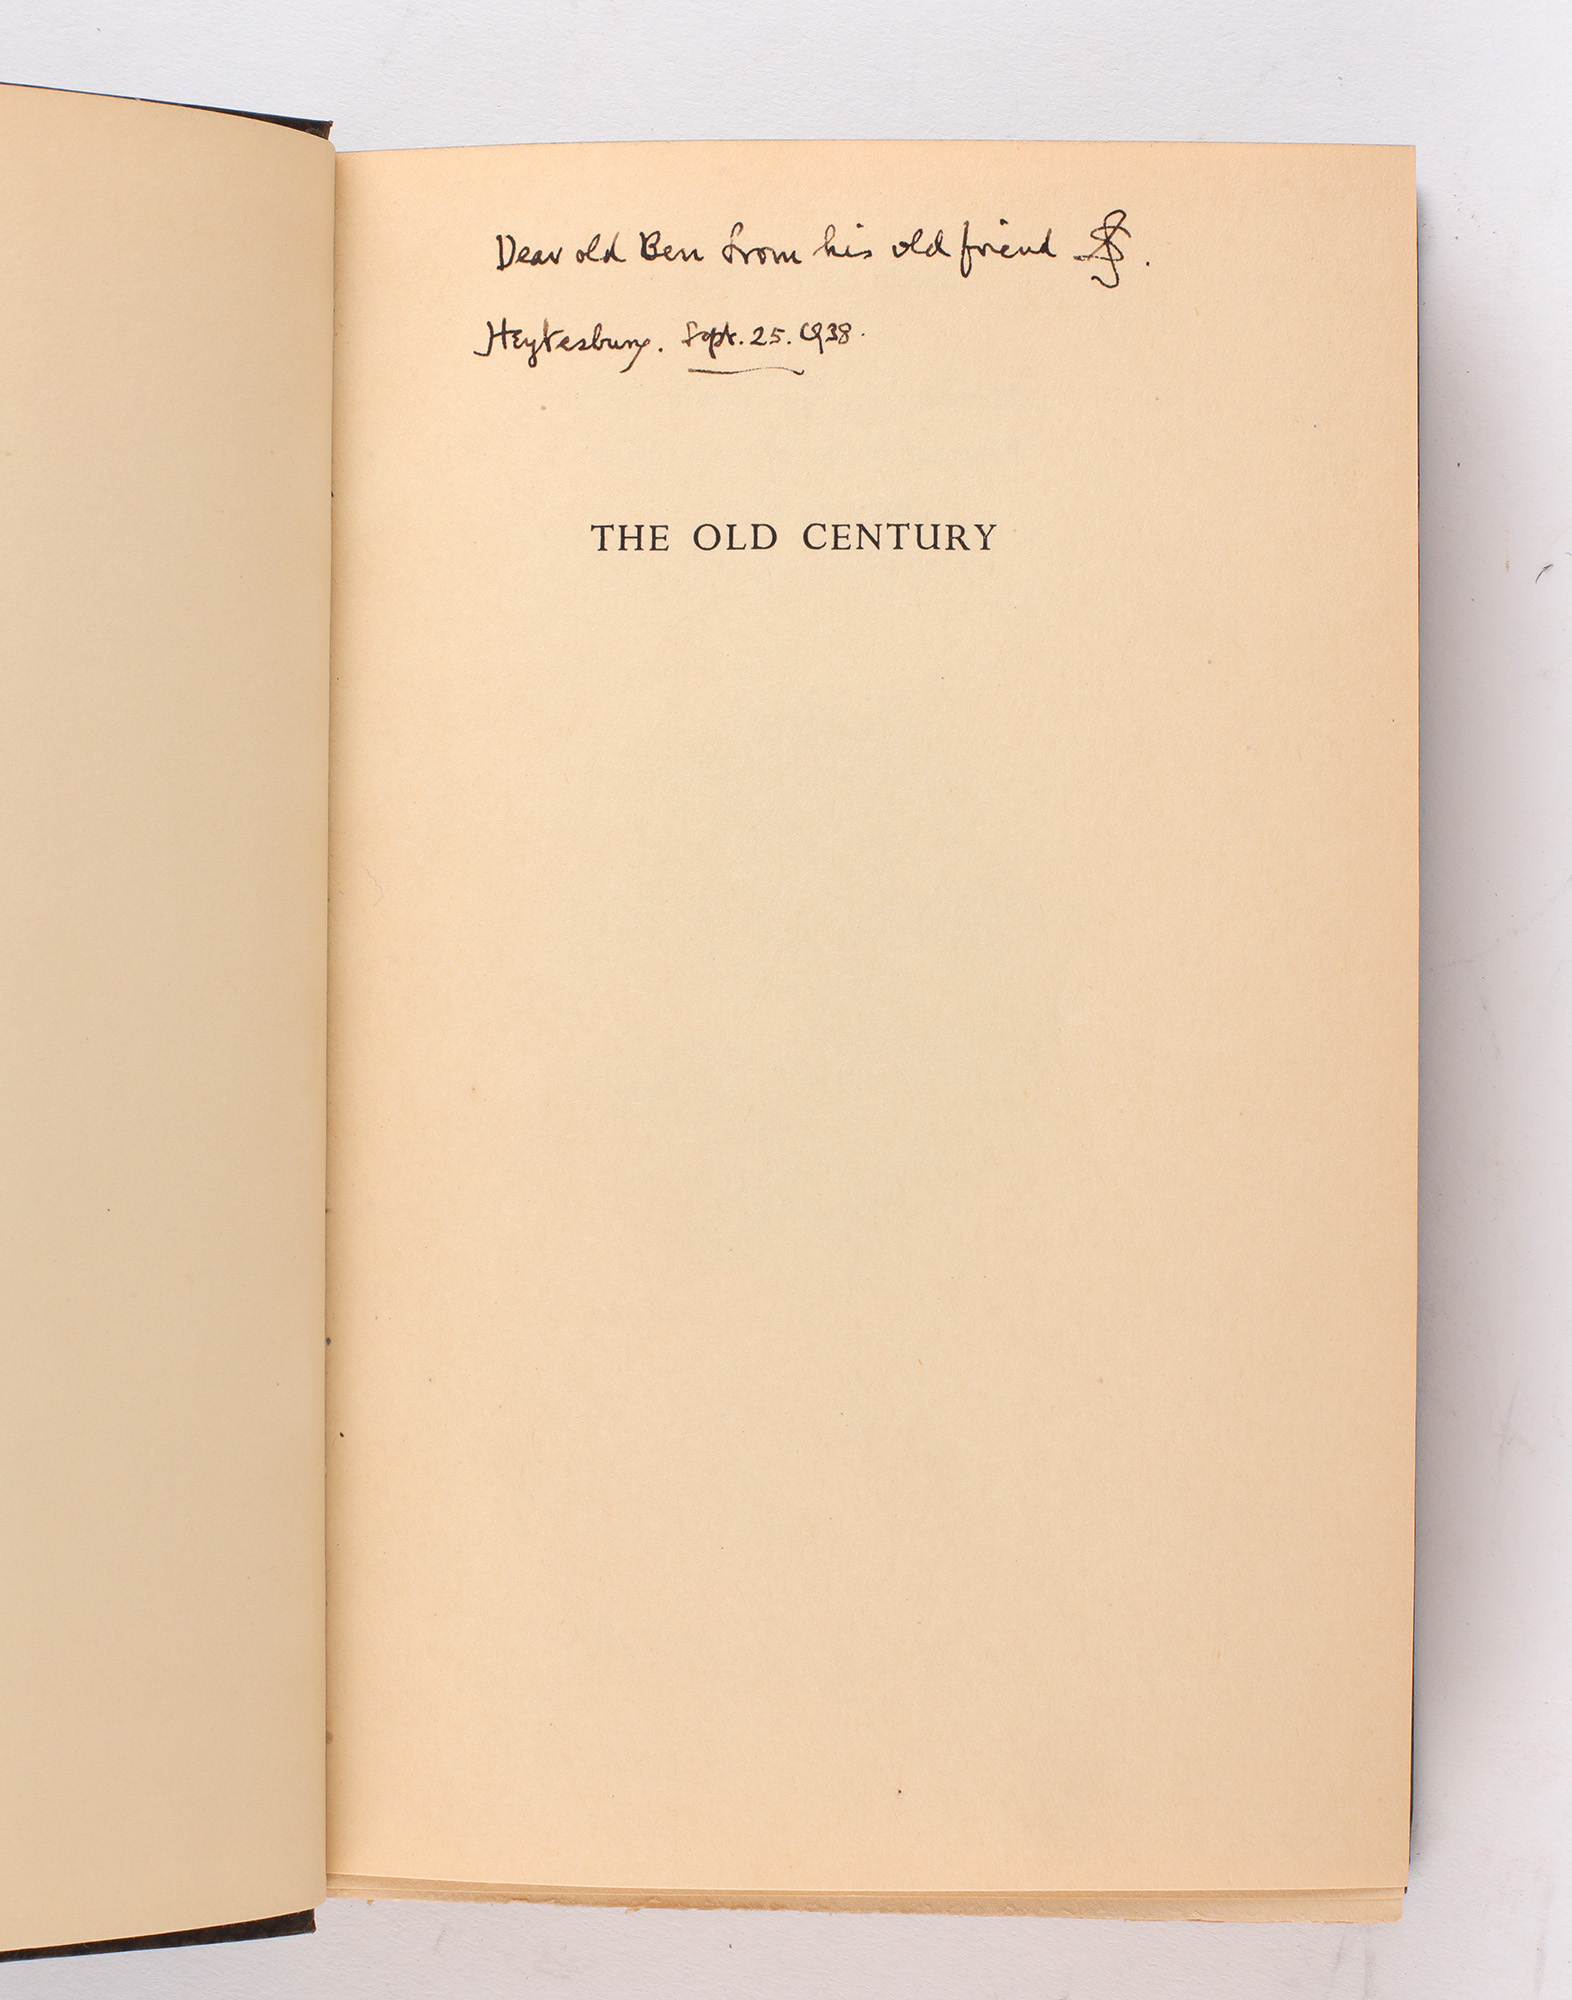 THE OLD CENTURY And Seven More Years by SASSOON, Siegfried: (1938 ...